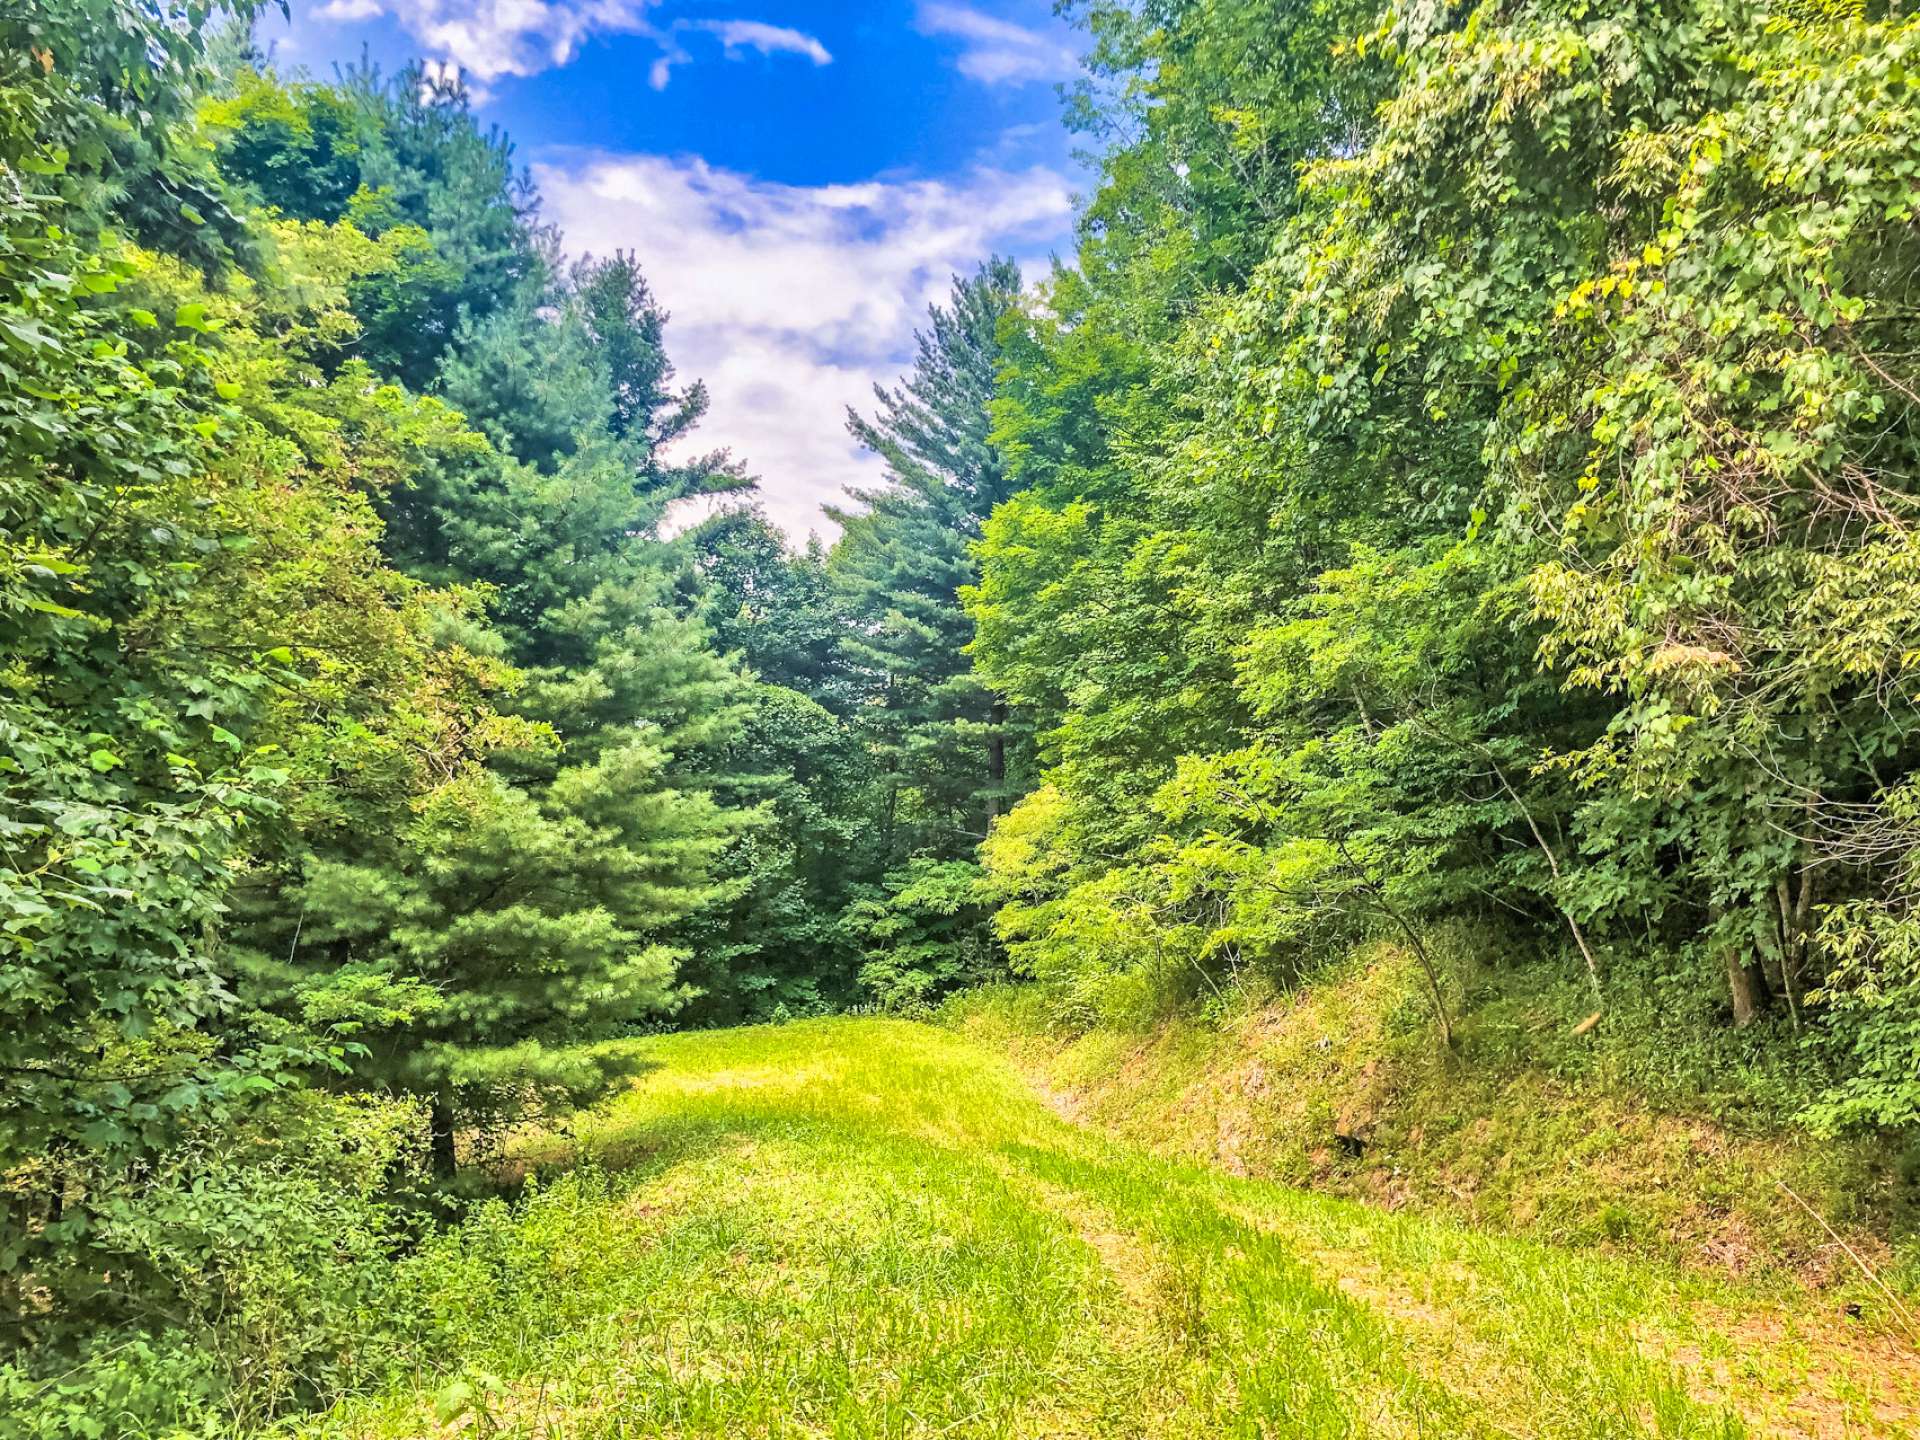 This tract offers a diverse mixture of native hardwoods, evergreens and mountain foliage